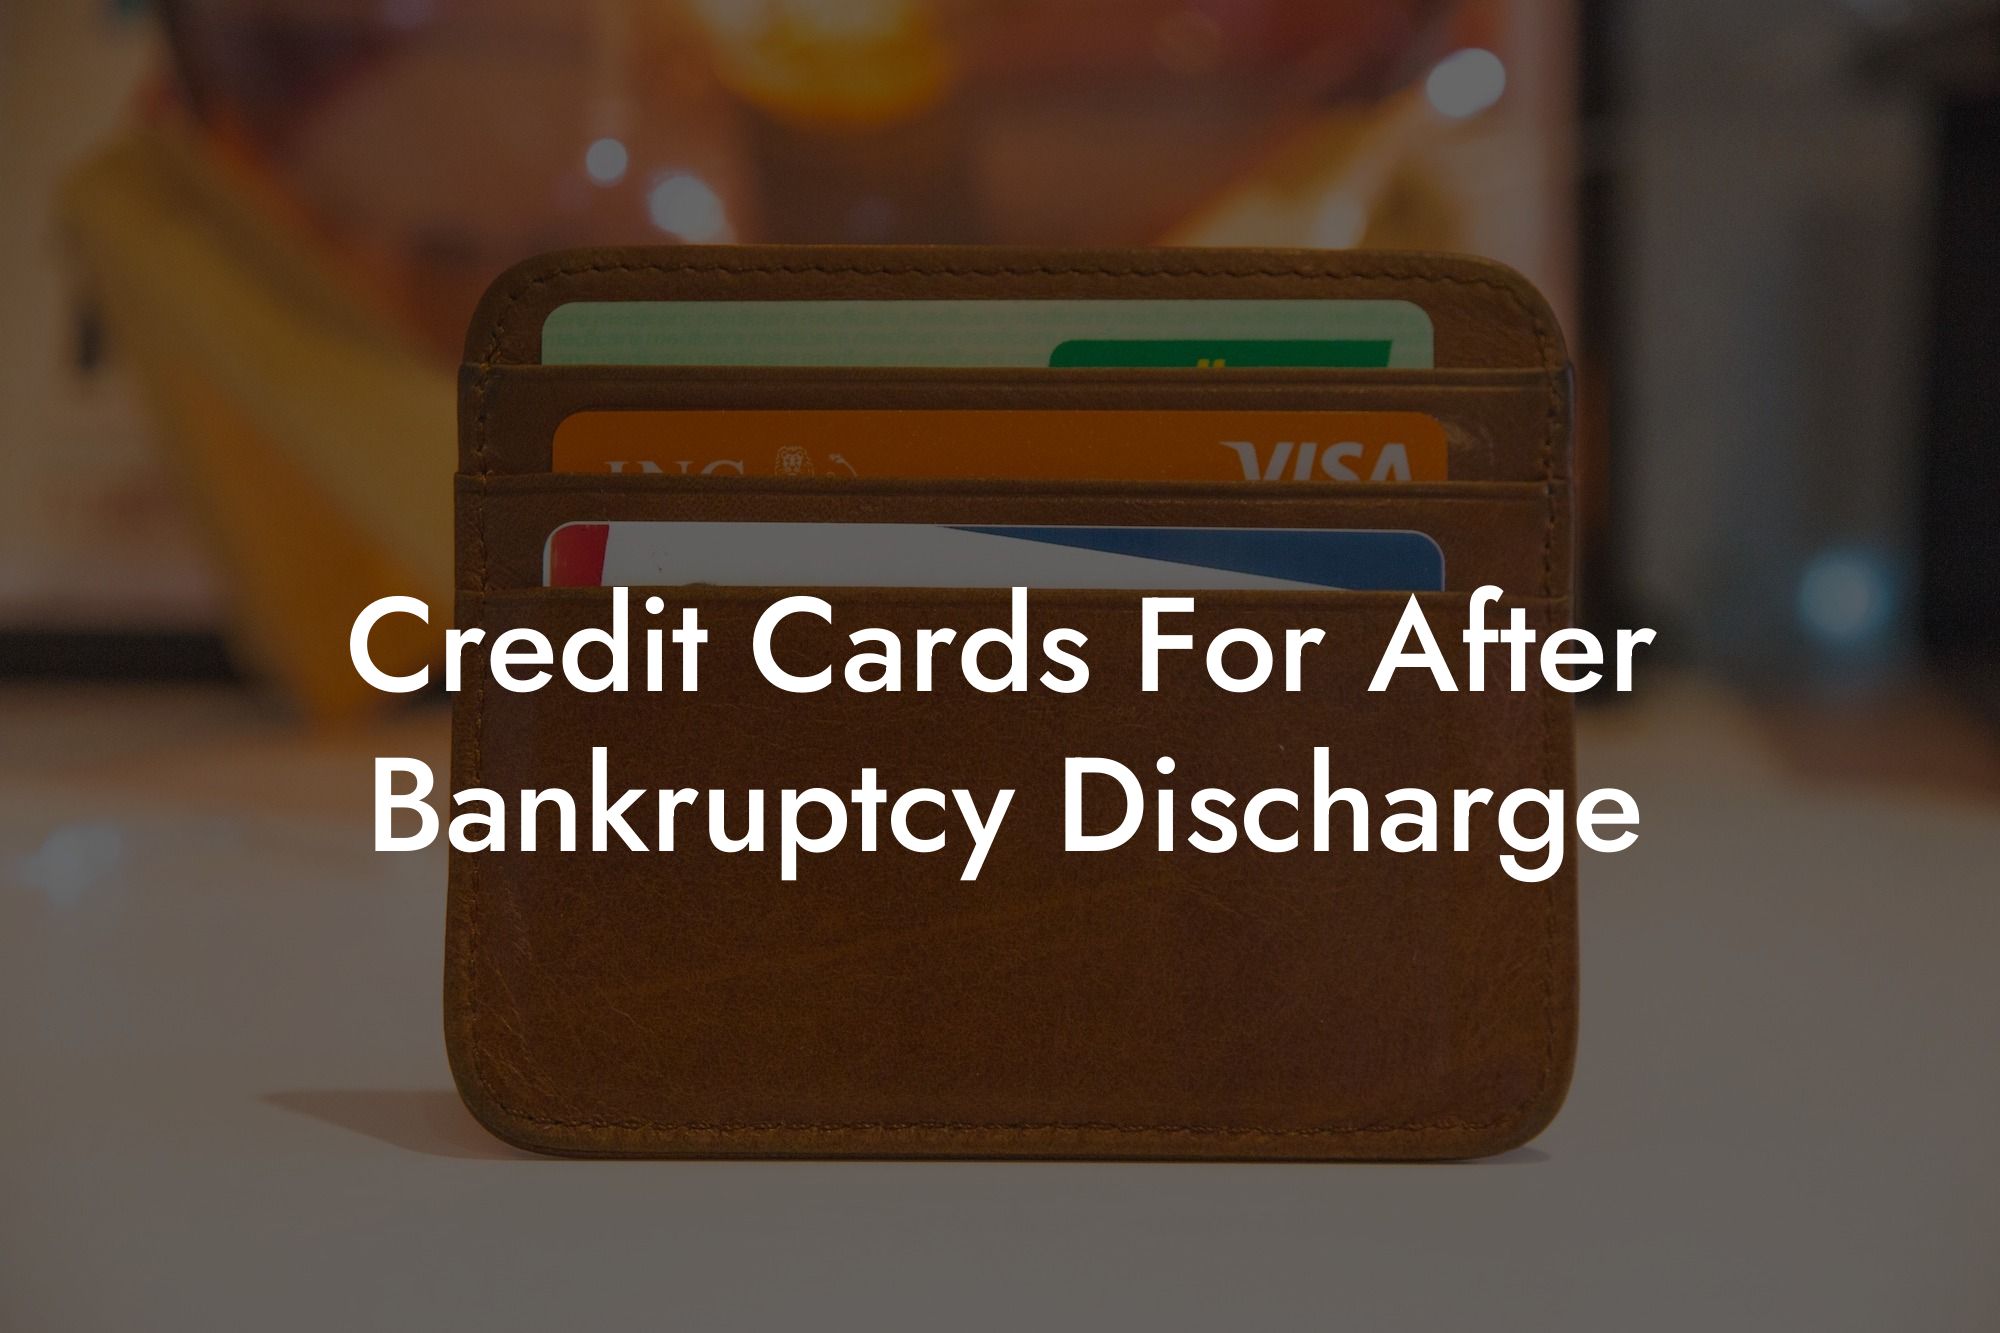 Credit Cards For After Bankruptcy Discharge